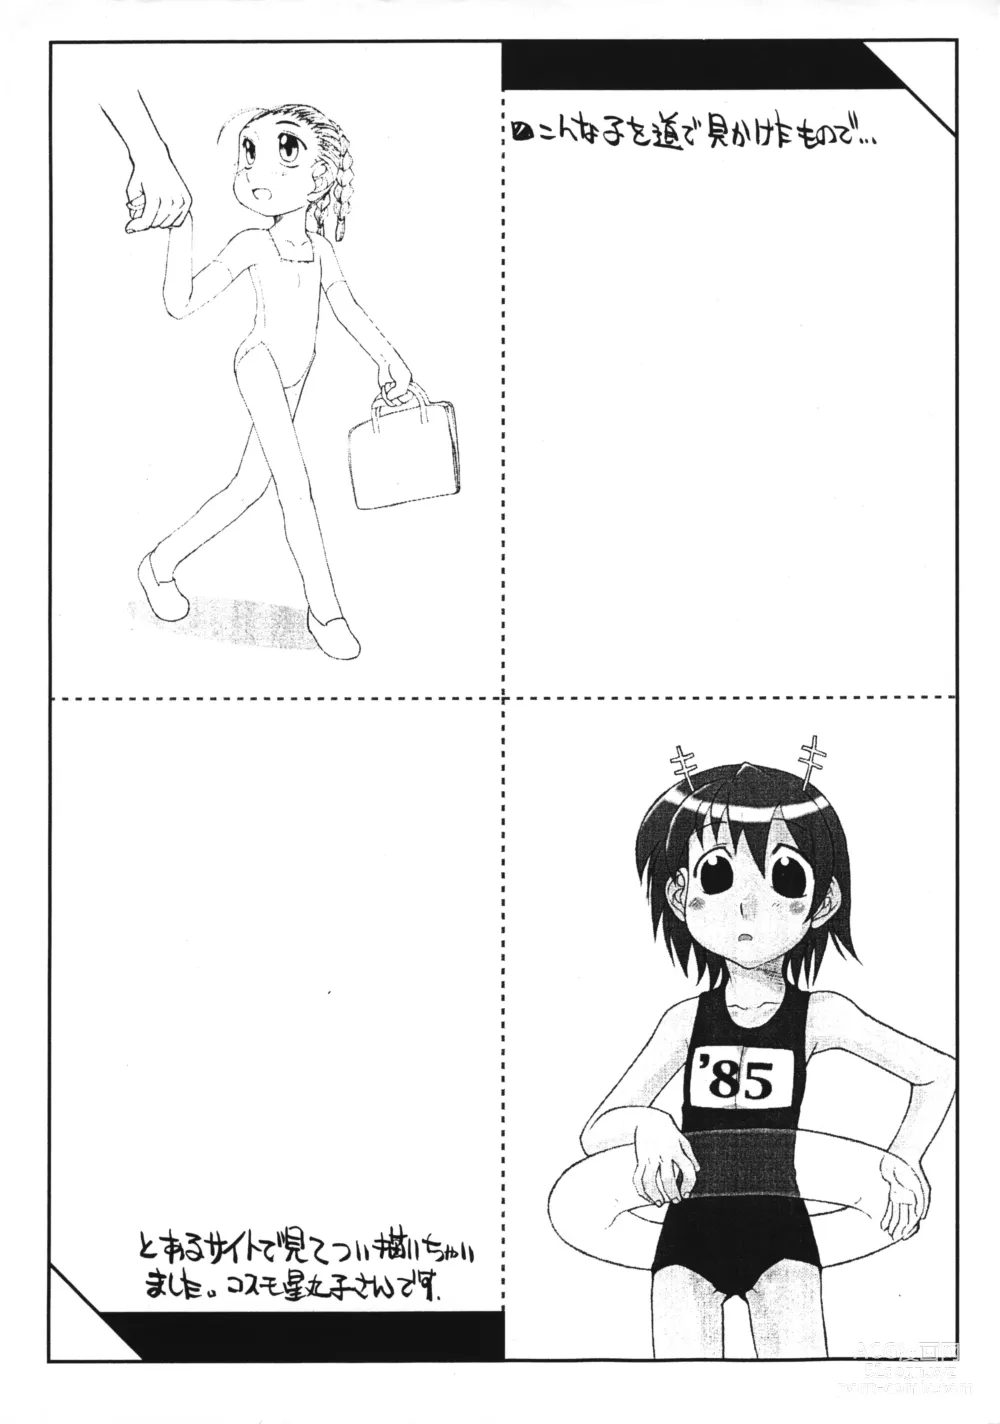 Page 8 of doujinshi non-n